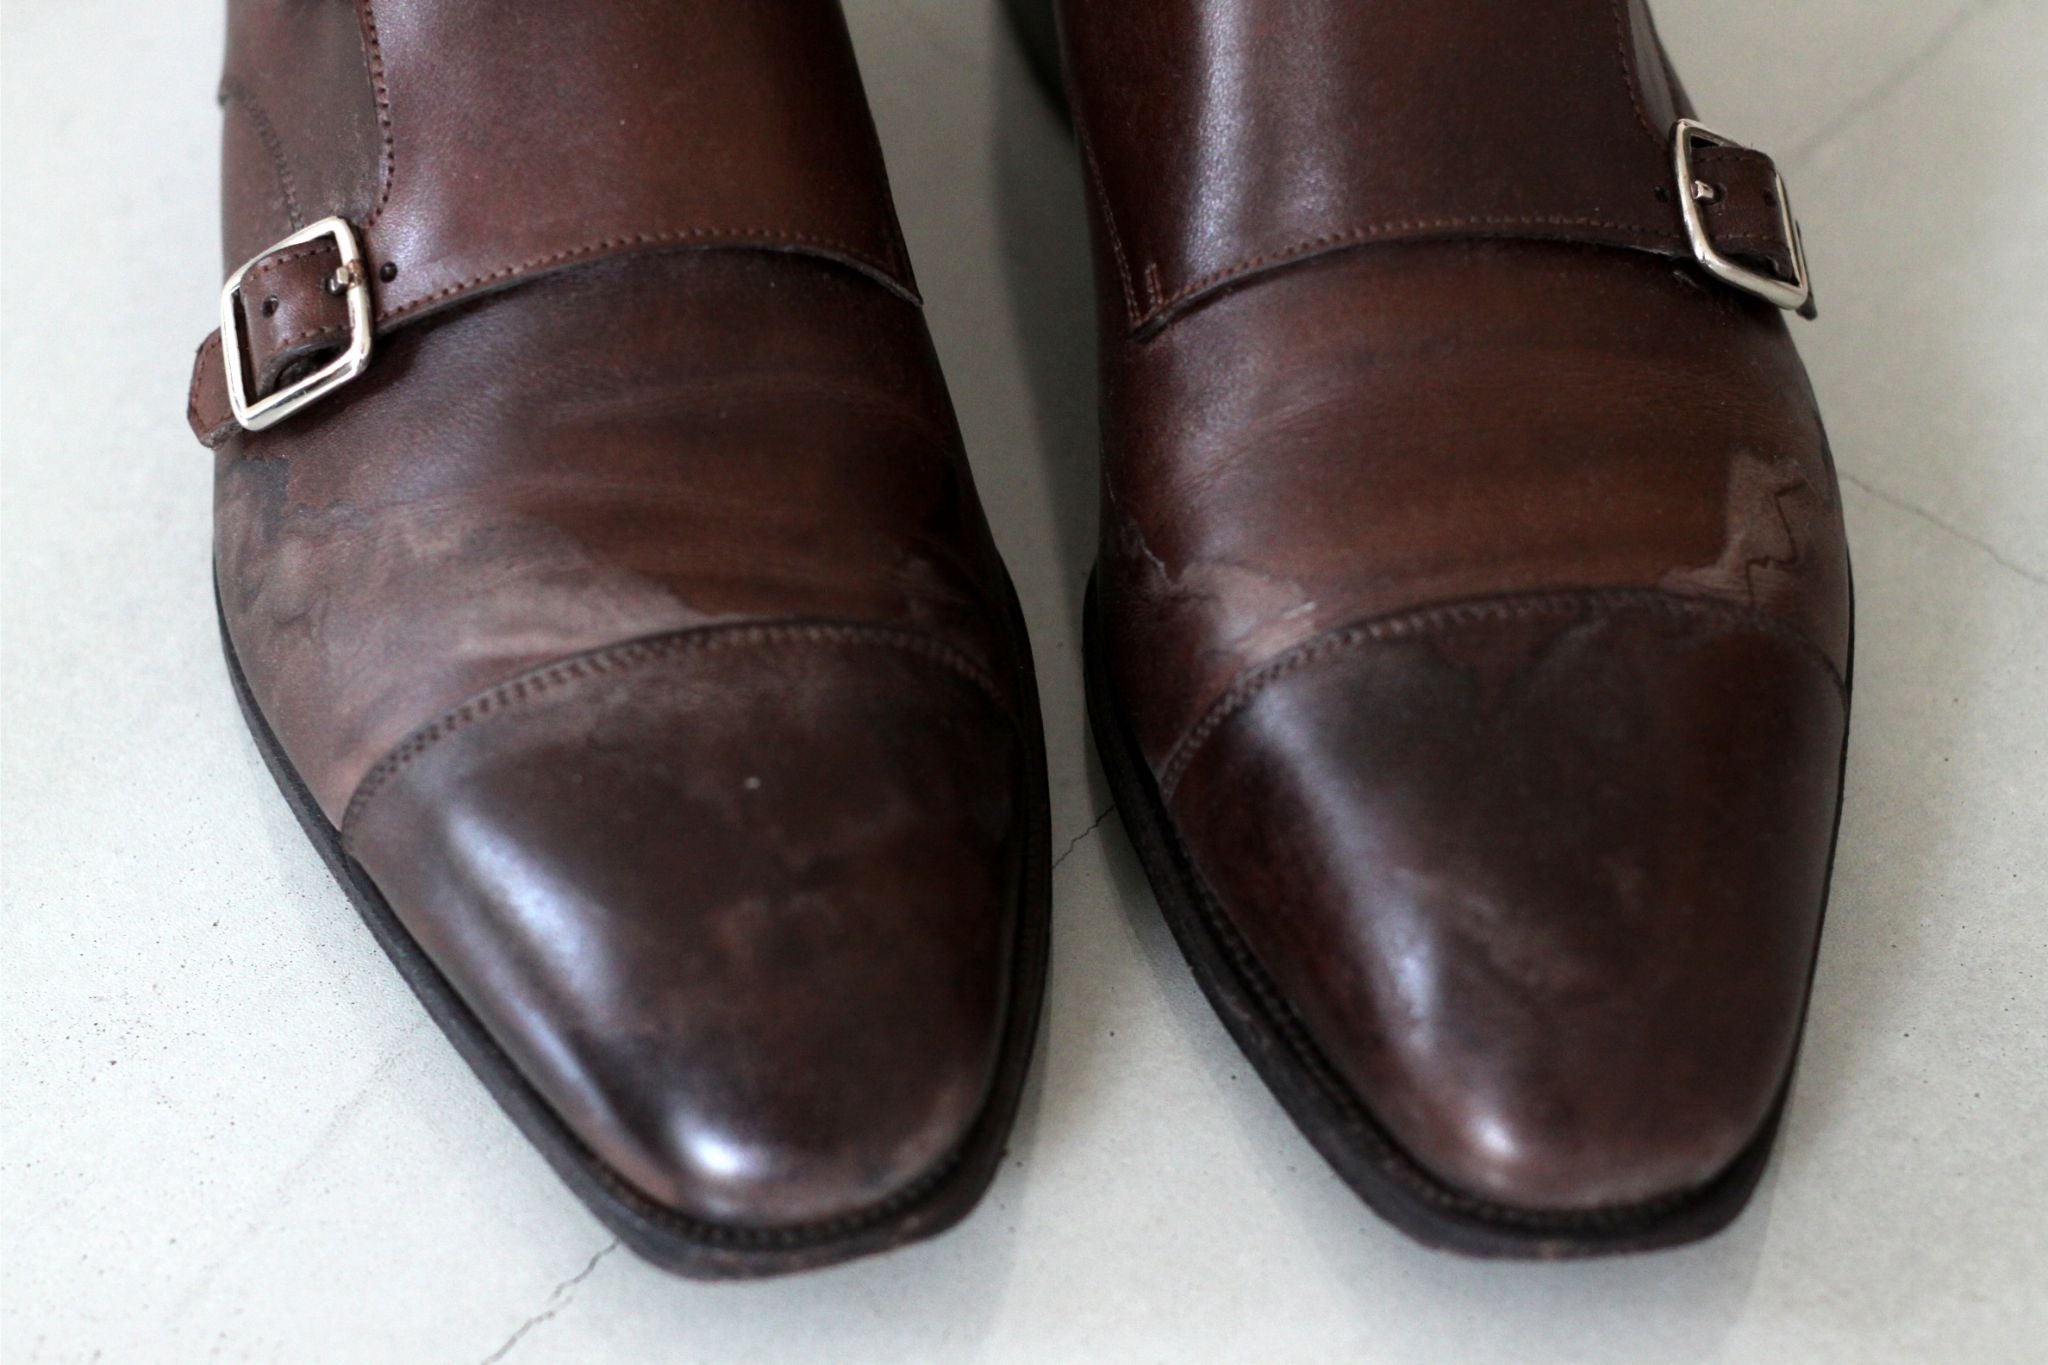 How to take care of your dress shoes - salt damages in shoes